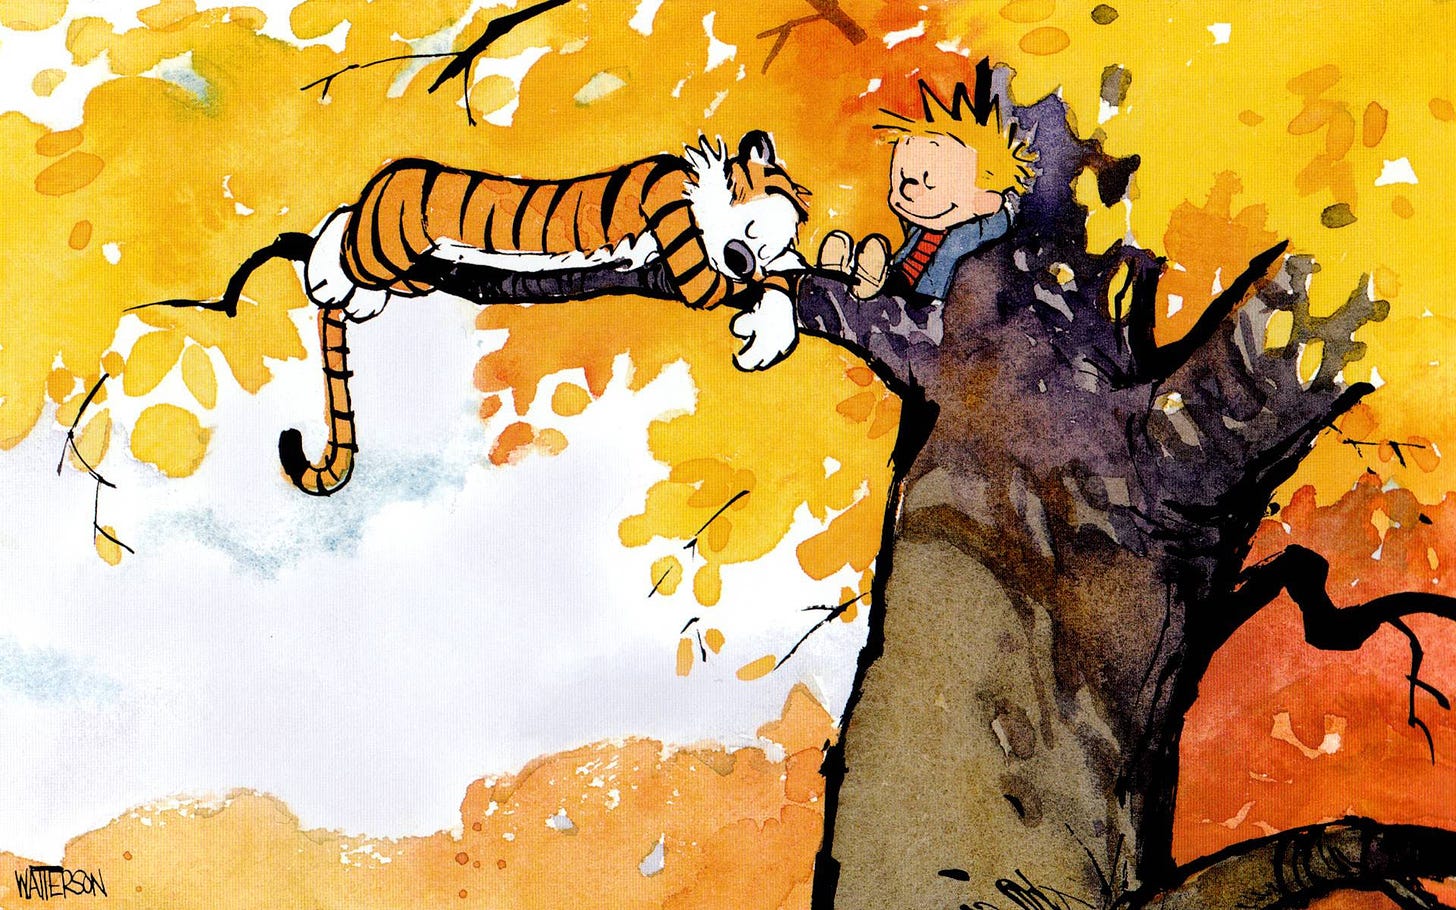 100+] Calvin And Hobbes Wallpapers | Wallpapers.com